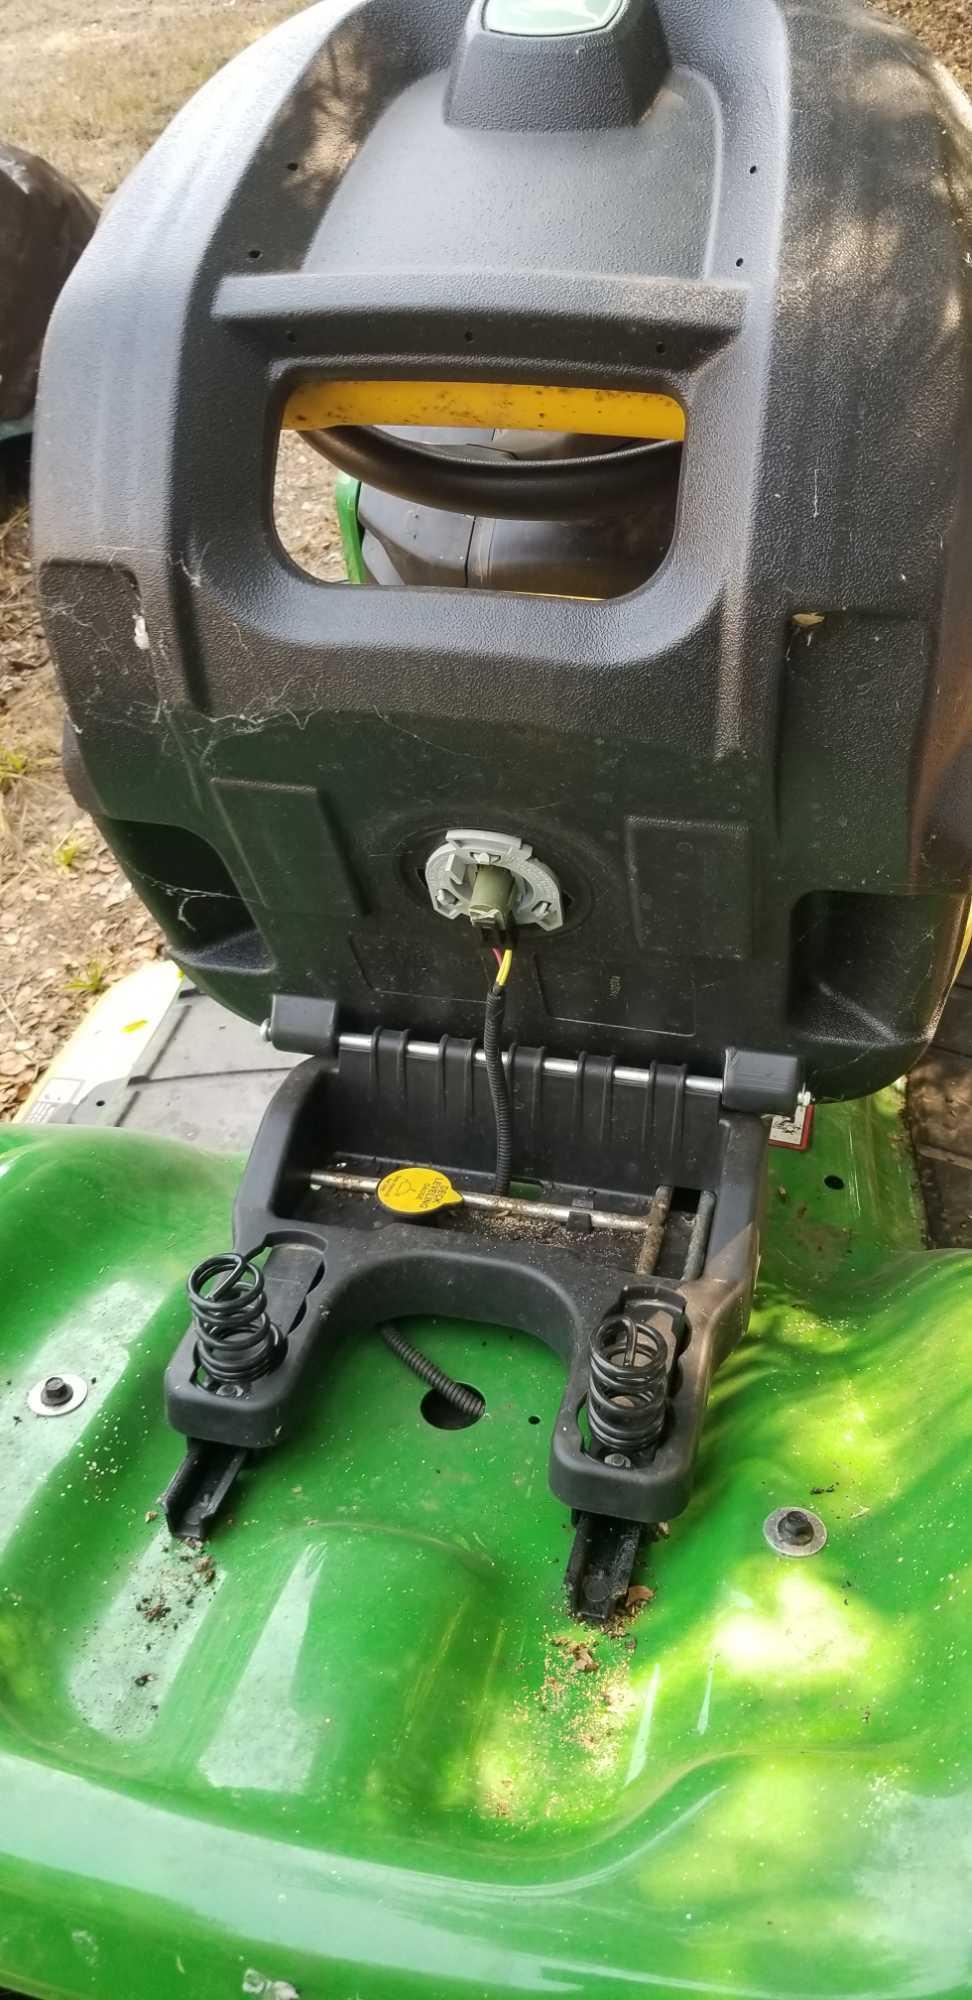 John Deere X350 Lawn Tractor with 48 in Deck